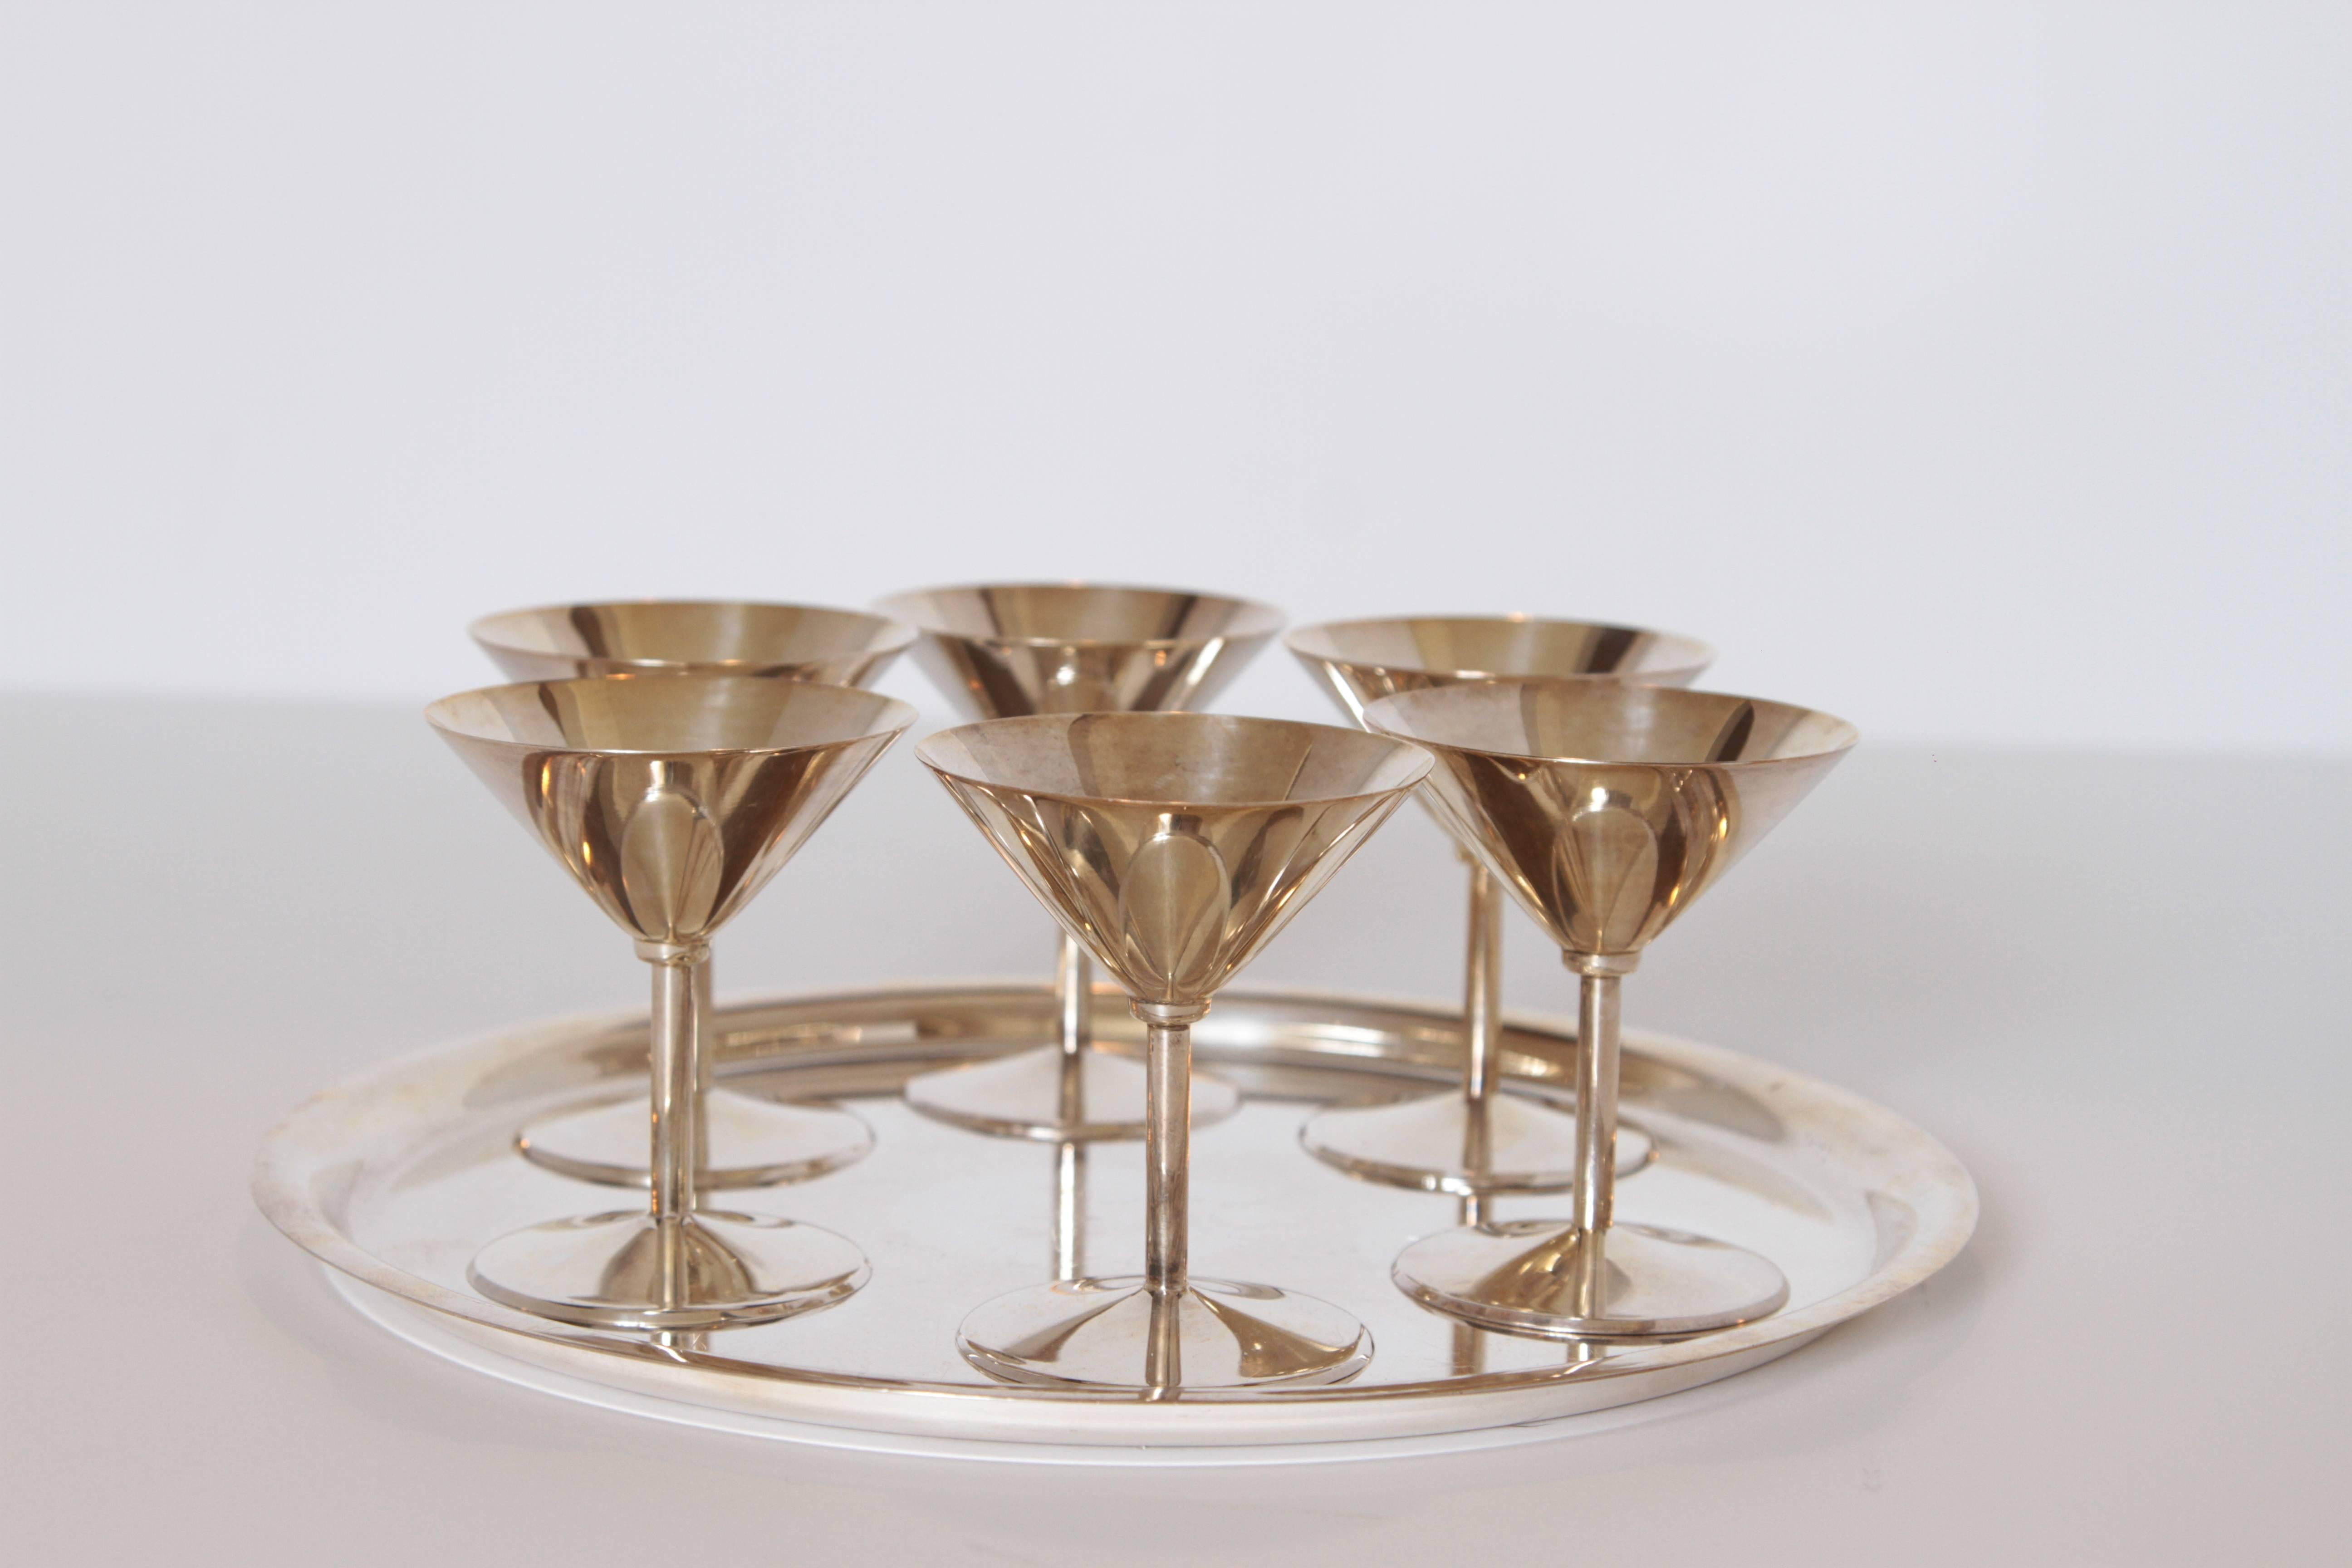 Machine Age Art Deco Silver Plate Cocktail Set by WMF Germany

Very elegant compact Bauhaus influenced set.
Excellent construction quality, with nicely weighted cups.
Six cups and tray. 
Measures: Cups are 3" tall with 2 3/4" diameter